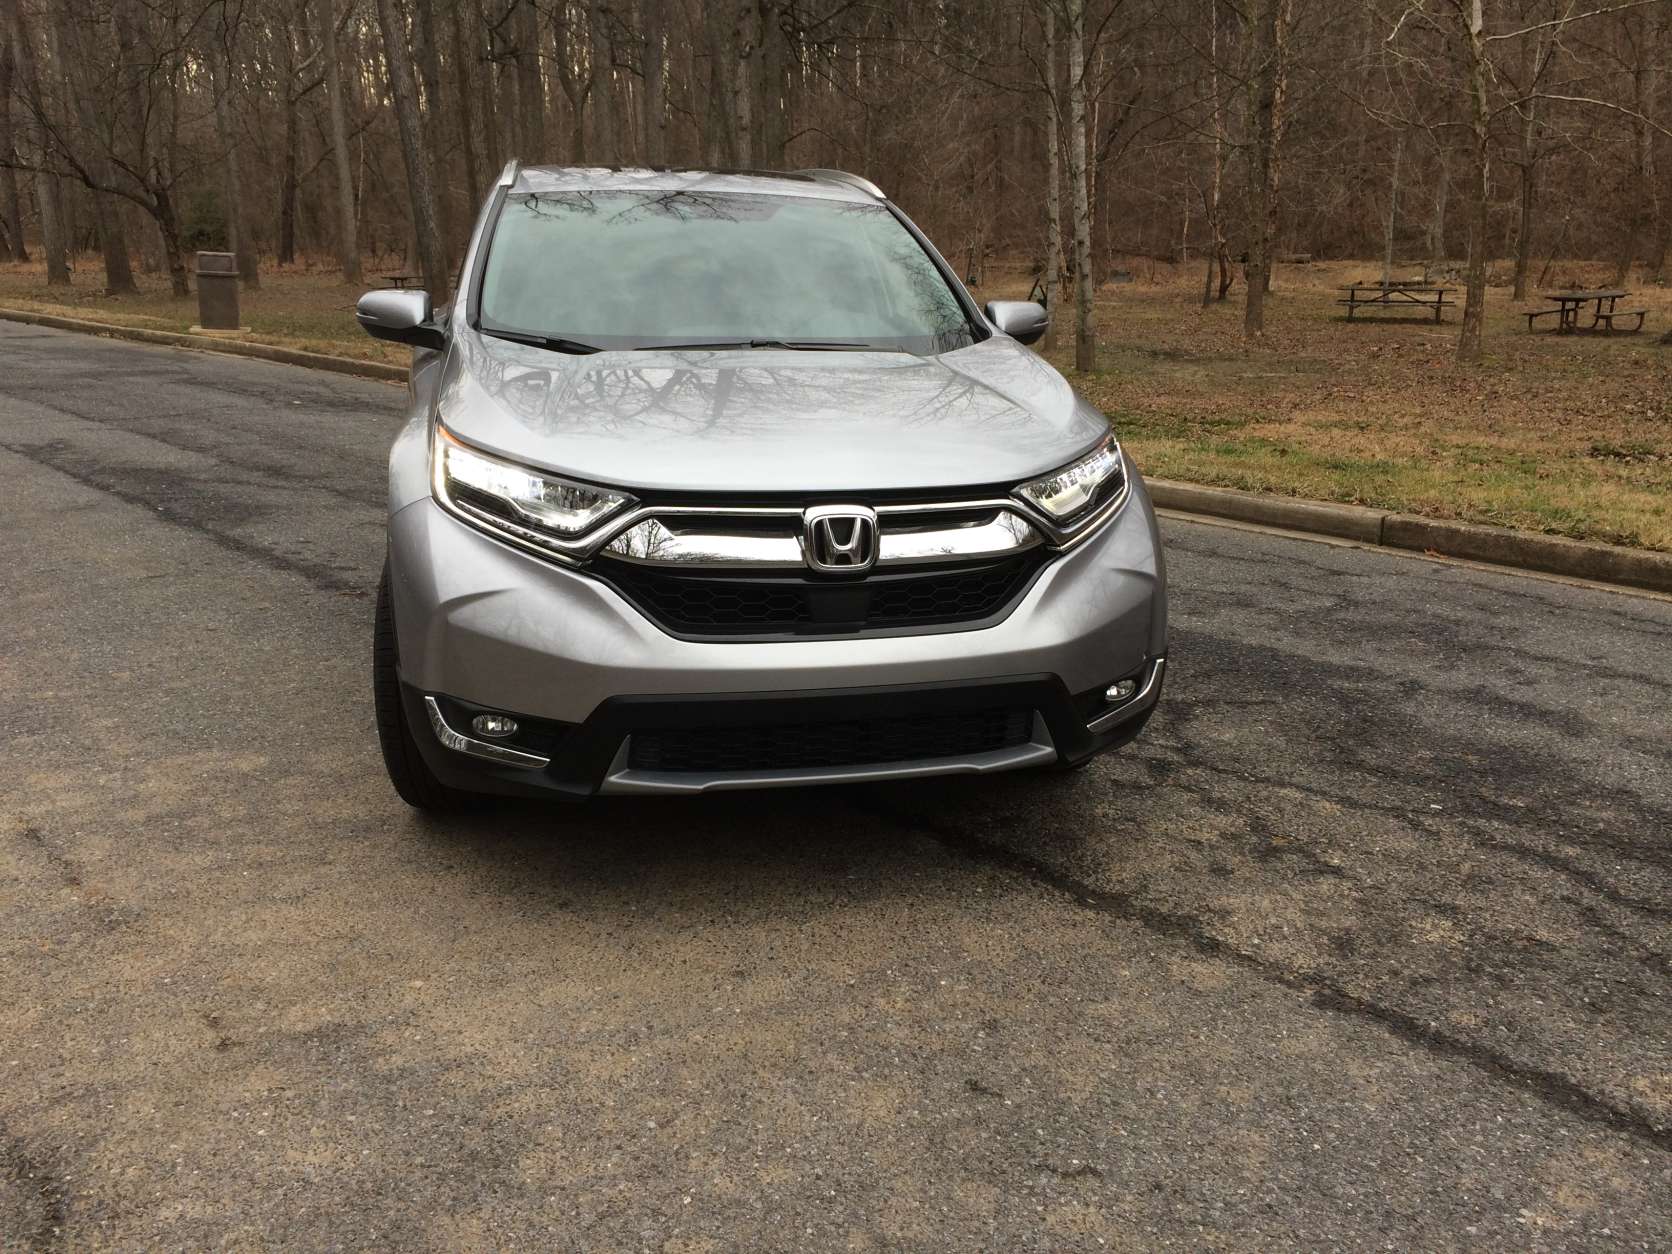 WTOP car columnist Mike Parris says the 2017 Honda CR-V is a big leap forward for this popular crossover. (WTOP/Mike Parris)